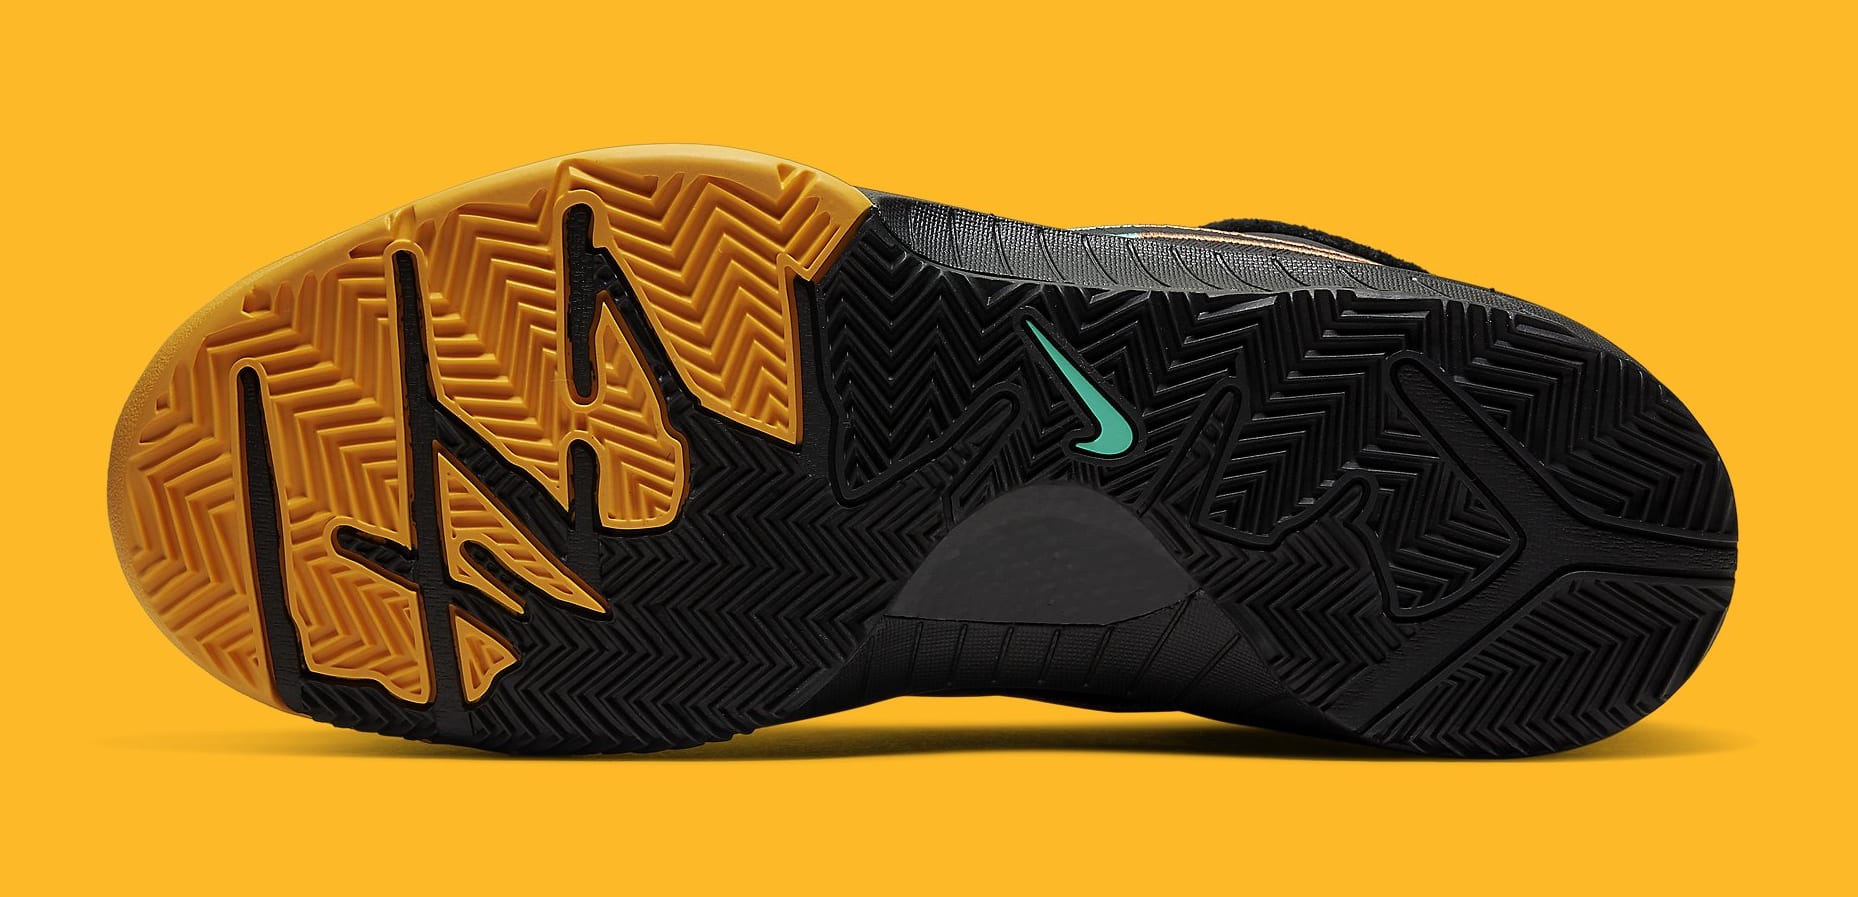 The “Black Gold” Nike Kobe 4 Protro is releasing December 26 for a